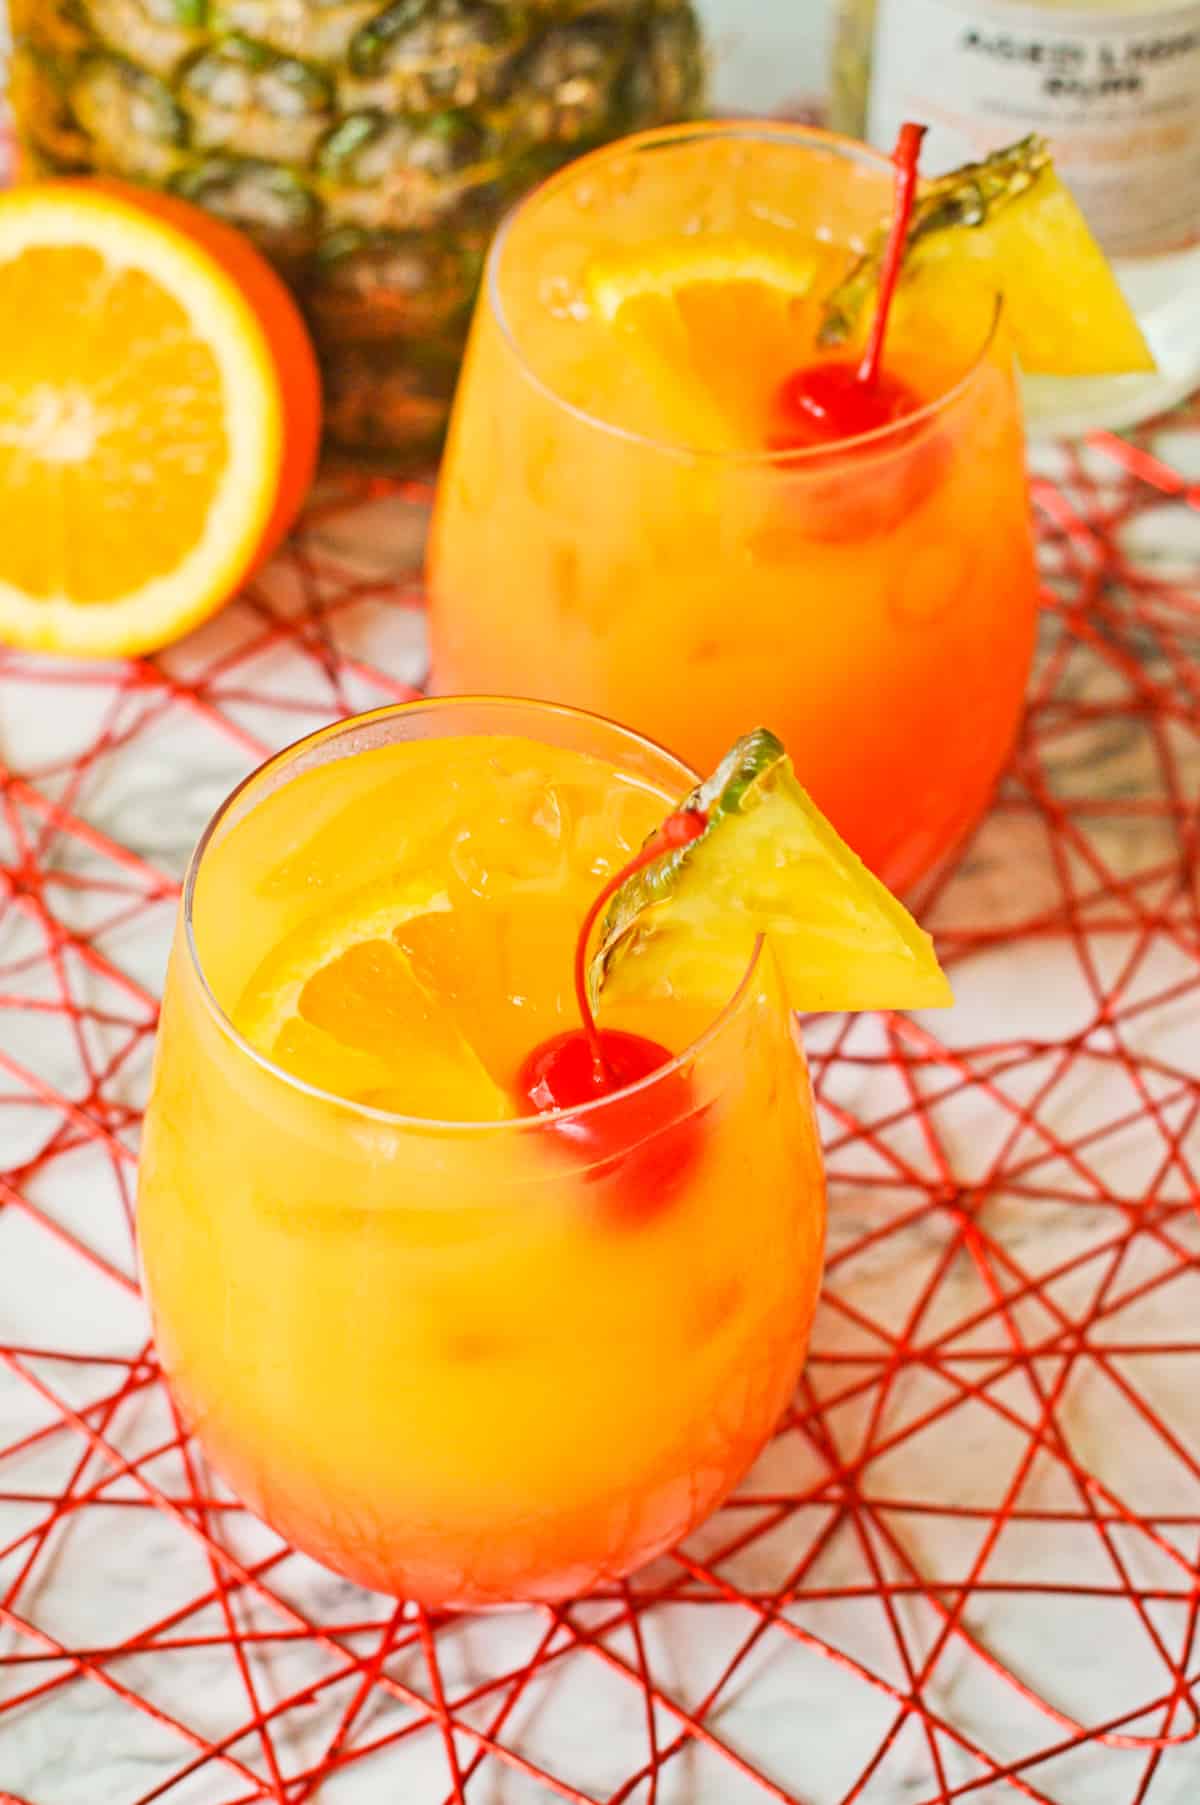 Rum Punch Cocktails with pineapple wedges, cherries, and orange slices.